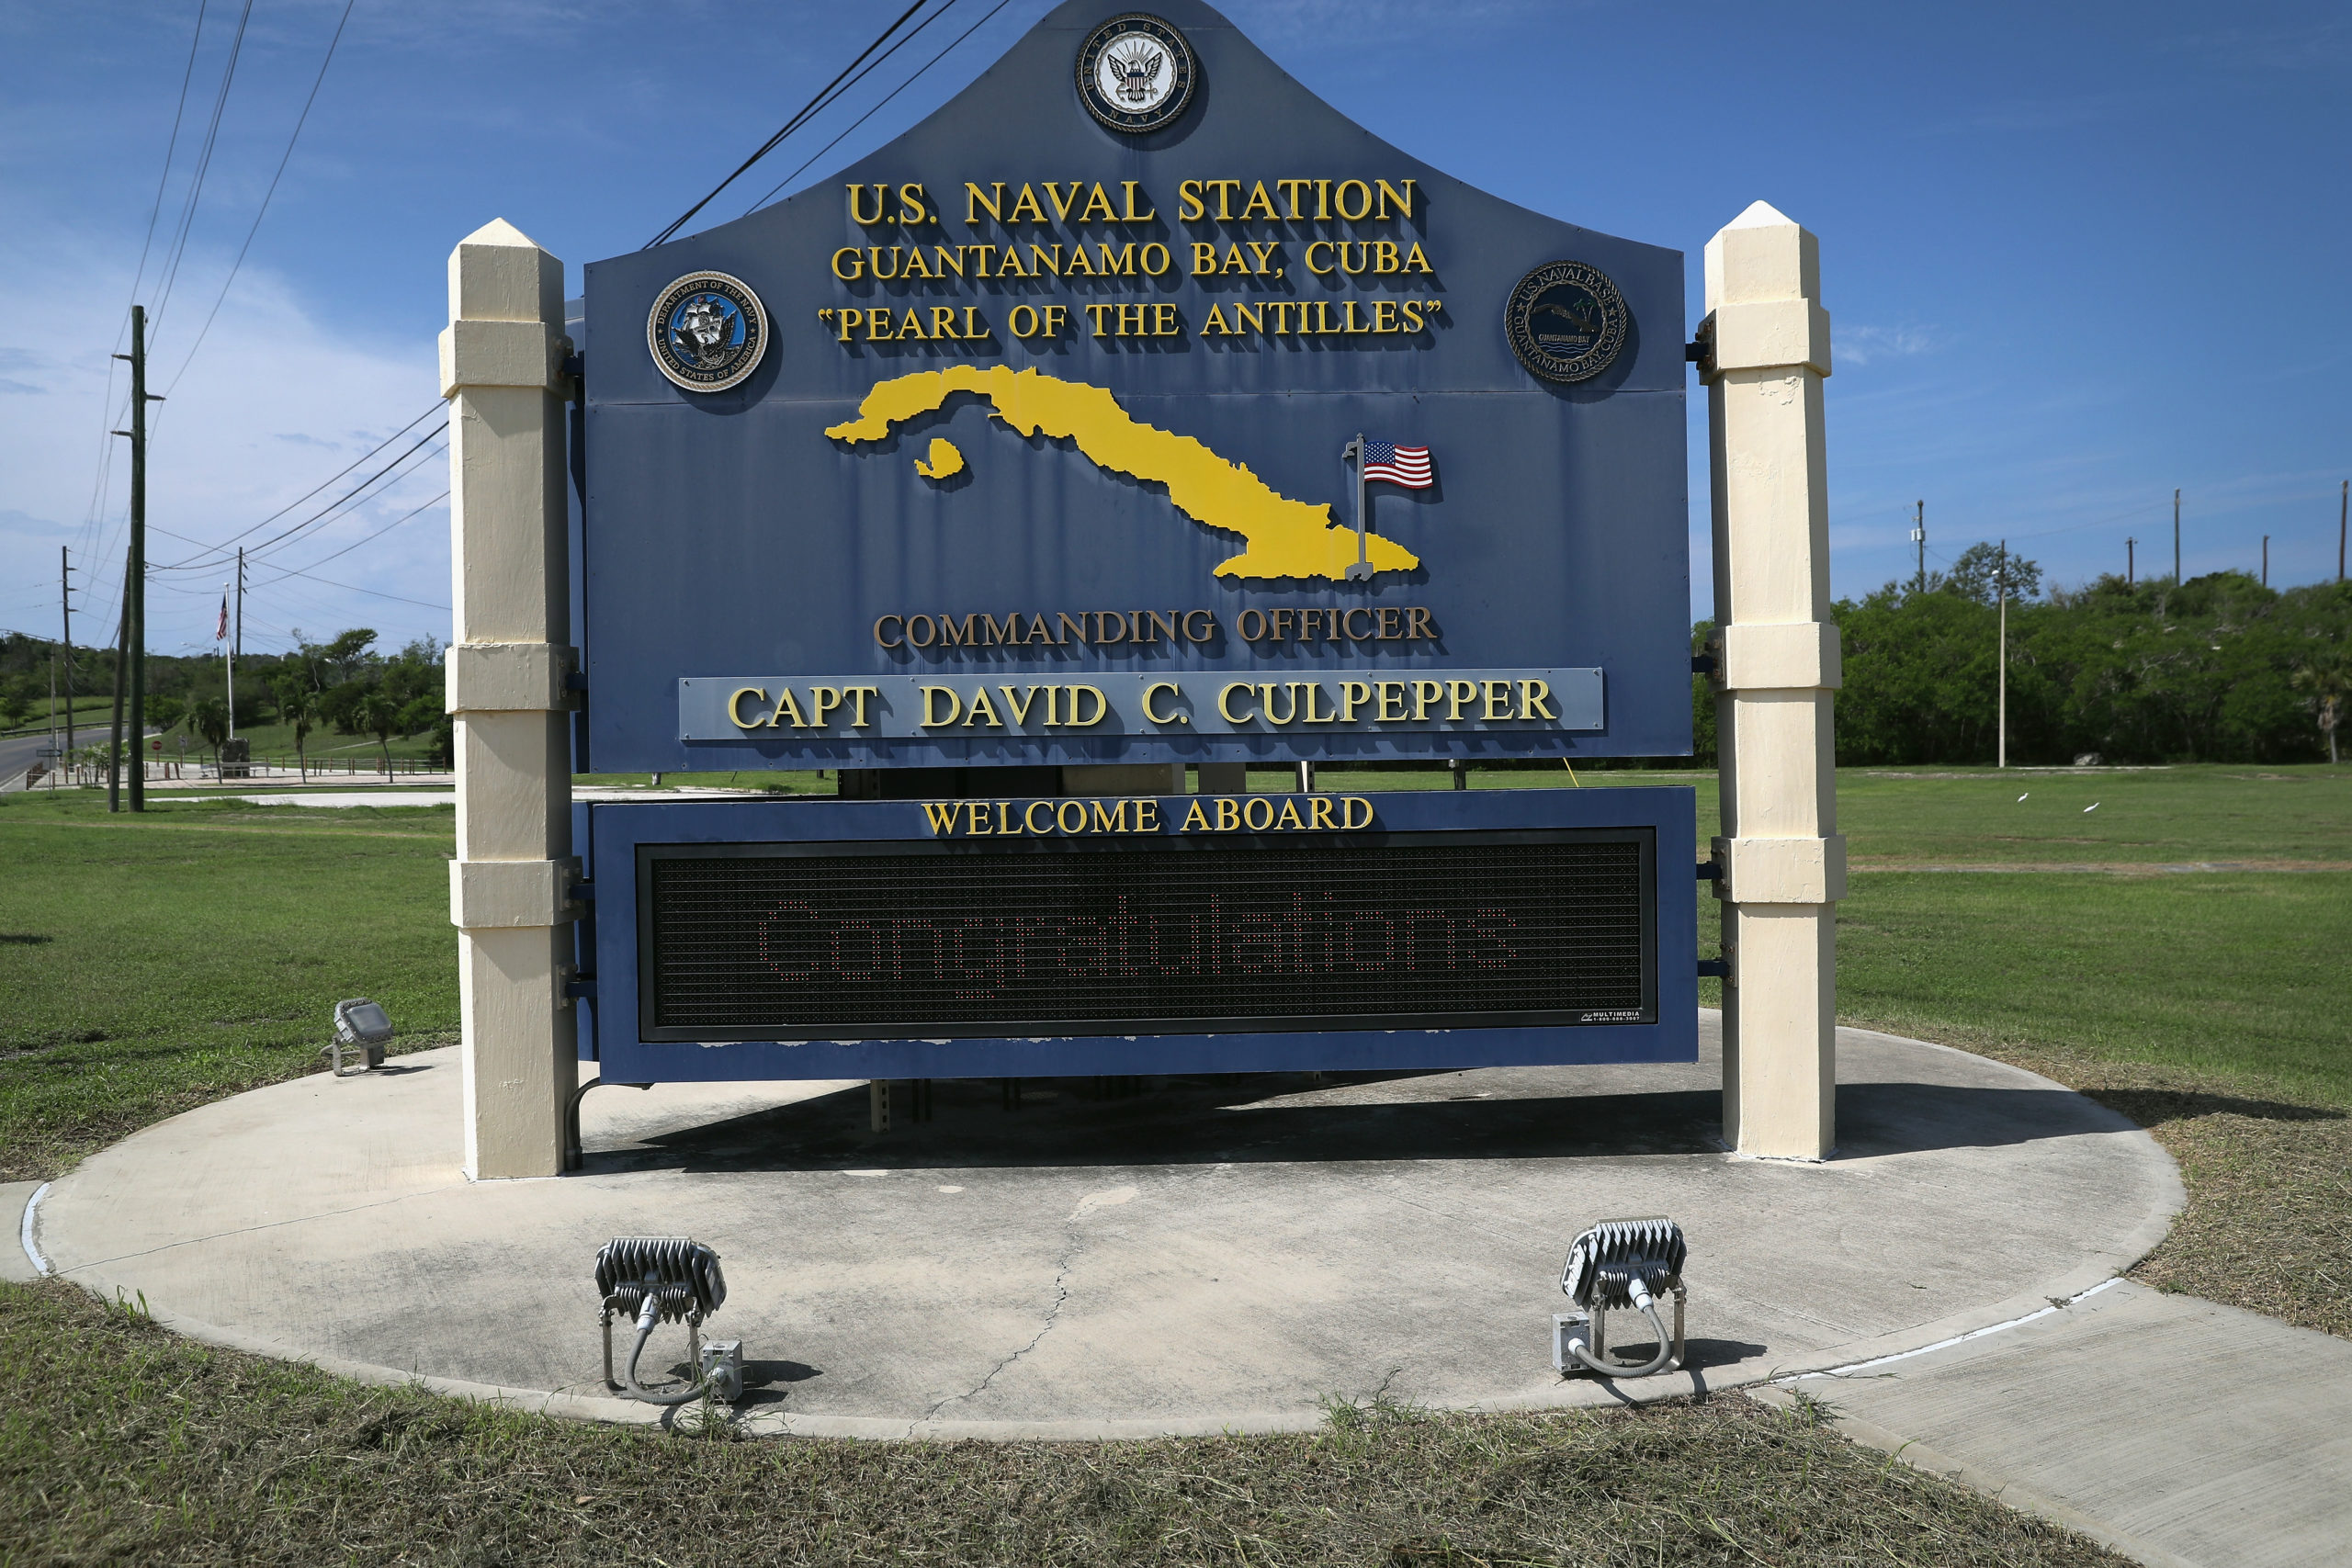 GUANTANAMO BAY, CUBA - OCTOBER 23: (EDITORS NOTE: Image has been reviewed by the U.S. Military prior to transmission.) A sign welcomes military personnel to the U.S. Naval Station at Guantanamo Bay, also known as "Gitmo" on October 23, 2016 at Guantanamo Bay, Cuba. The U.S. military's Joint Task Force Guantanamo is holding 60 detainees at the U.S. prison, located on the naval base, down from a previous total of 780. In 2008 President Obama issued an executive order to close the prison, which has failed because of political opposition in the U.S. (Photo by John Moore/Getty Images)